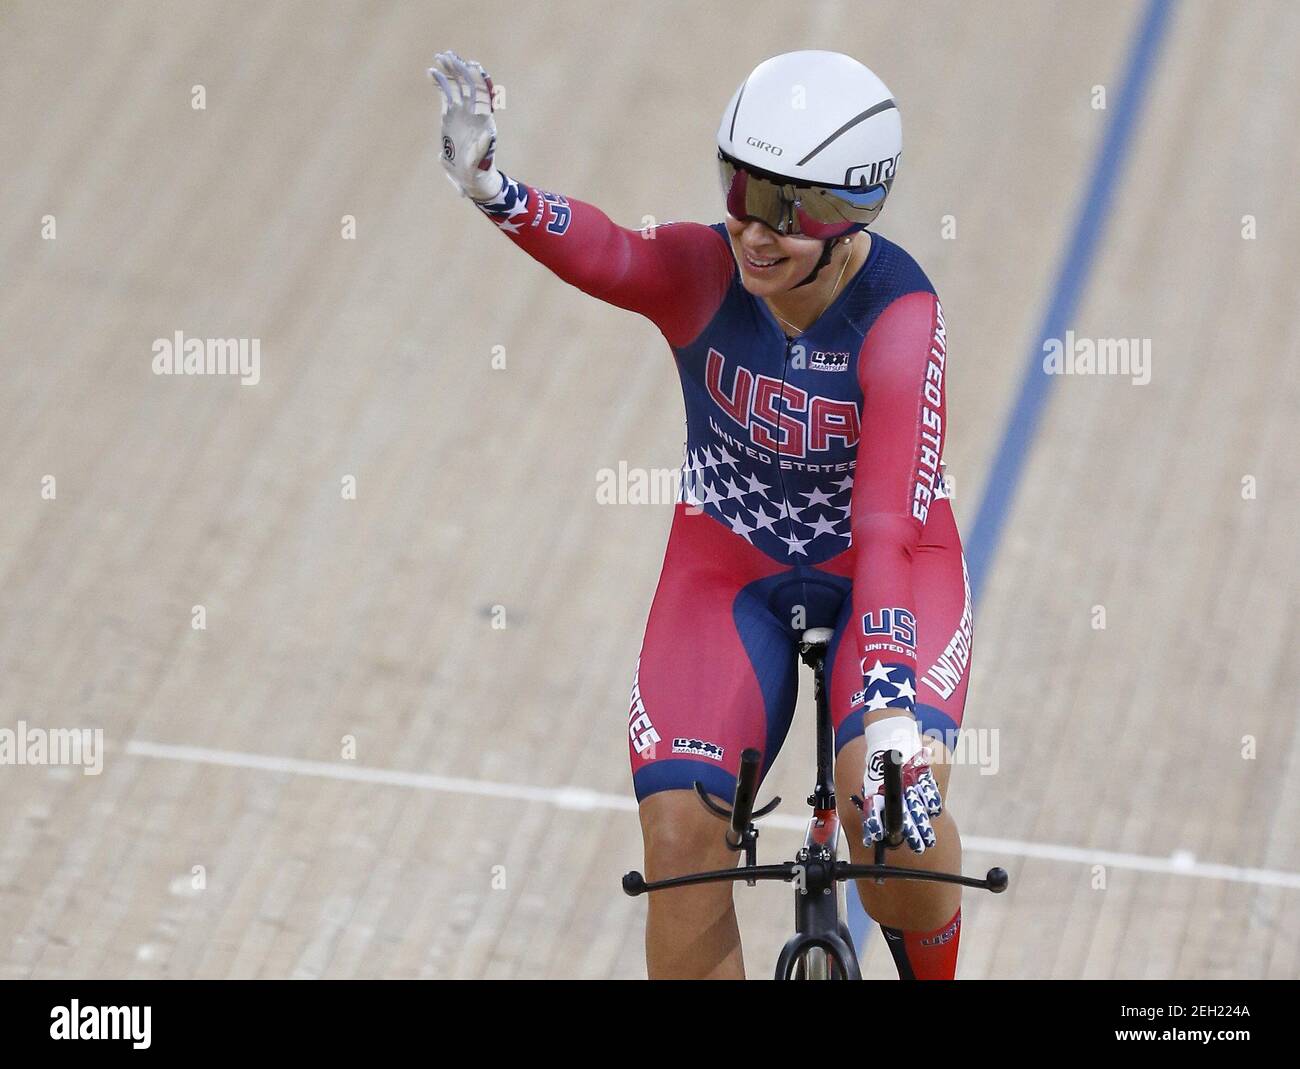 UCI World Track Cycling Championships - London, Britain - 5/3/2016 - Sarah Hammer of the United States celebrates after competing in the women's omnium individual pursuit. REUTERS/Andrew Winning   Picture Supplied by Action Images Stock Photo